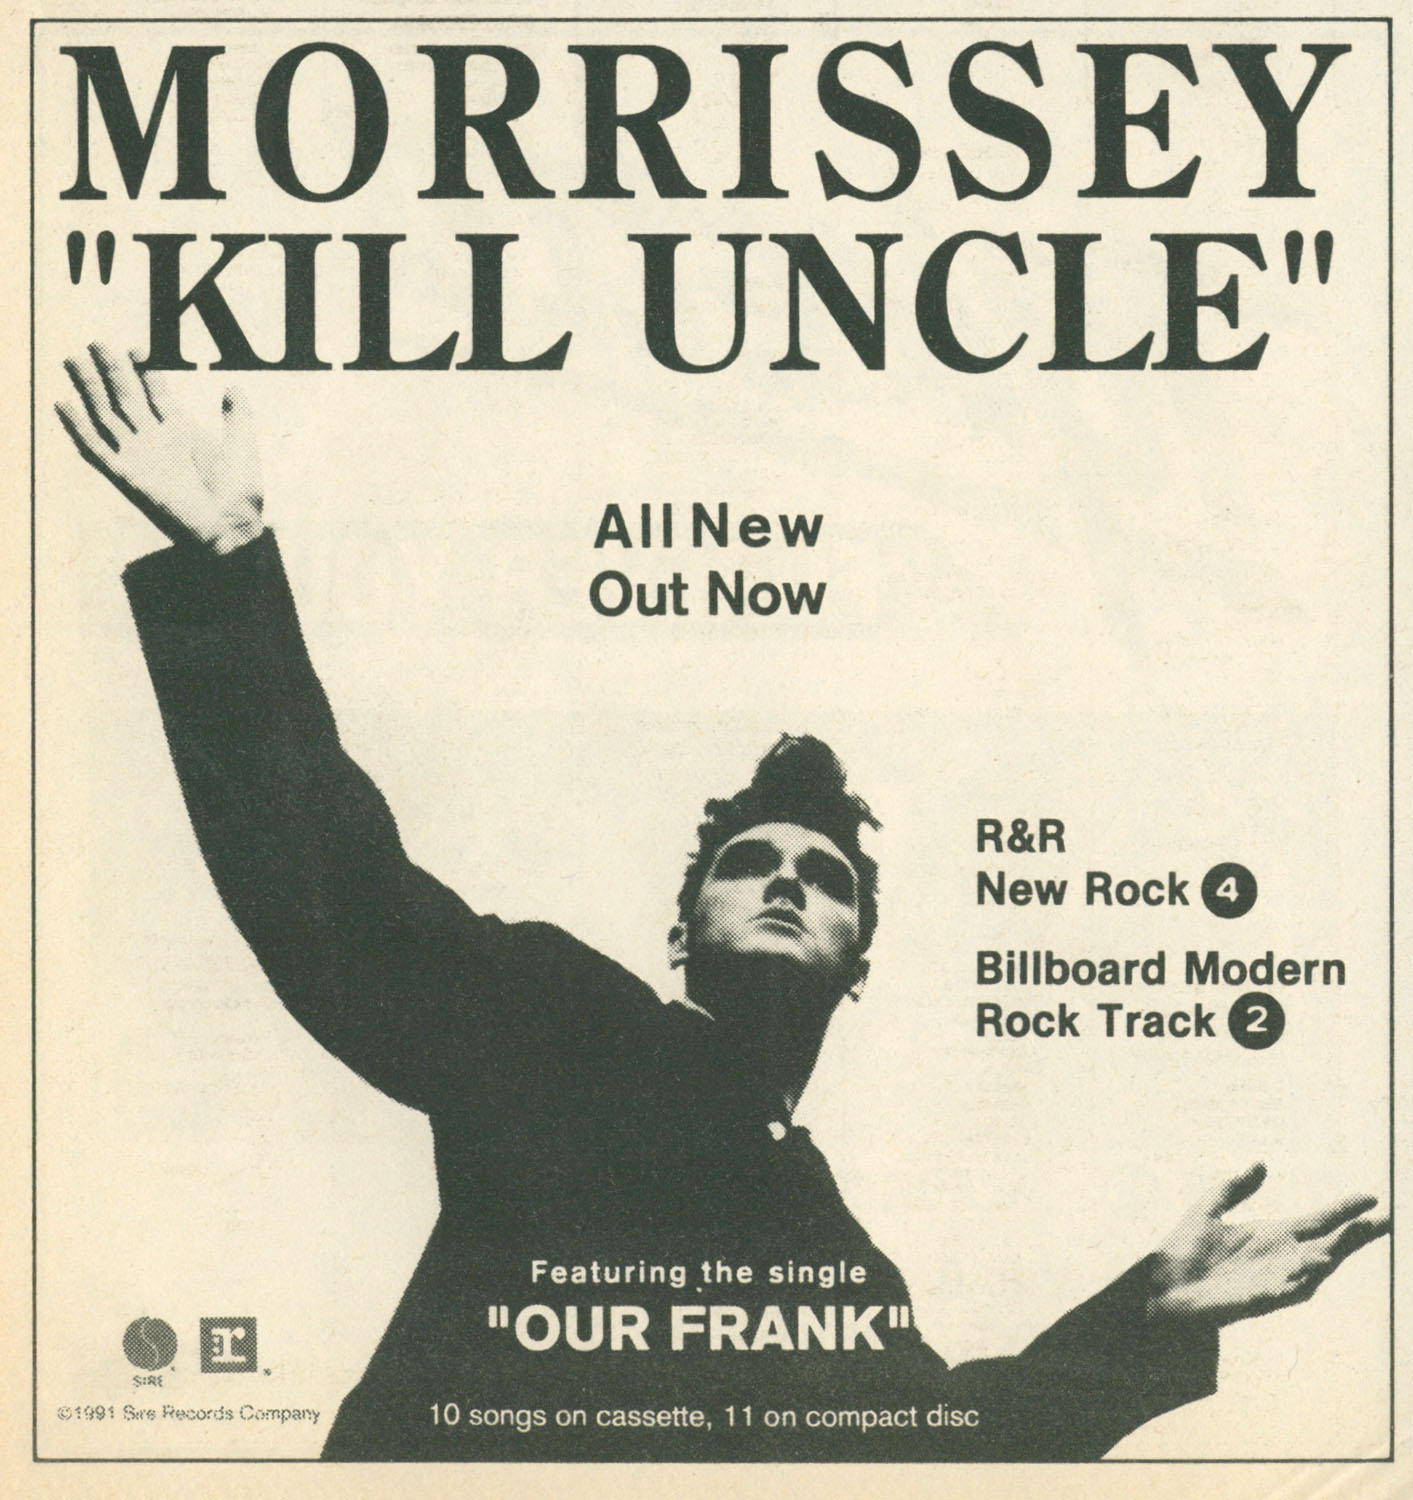 Ads, Kill Uncle, 1991